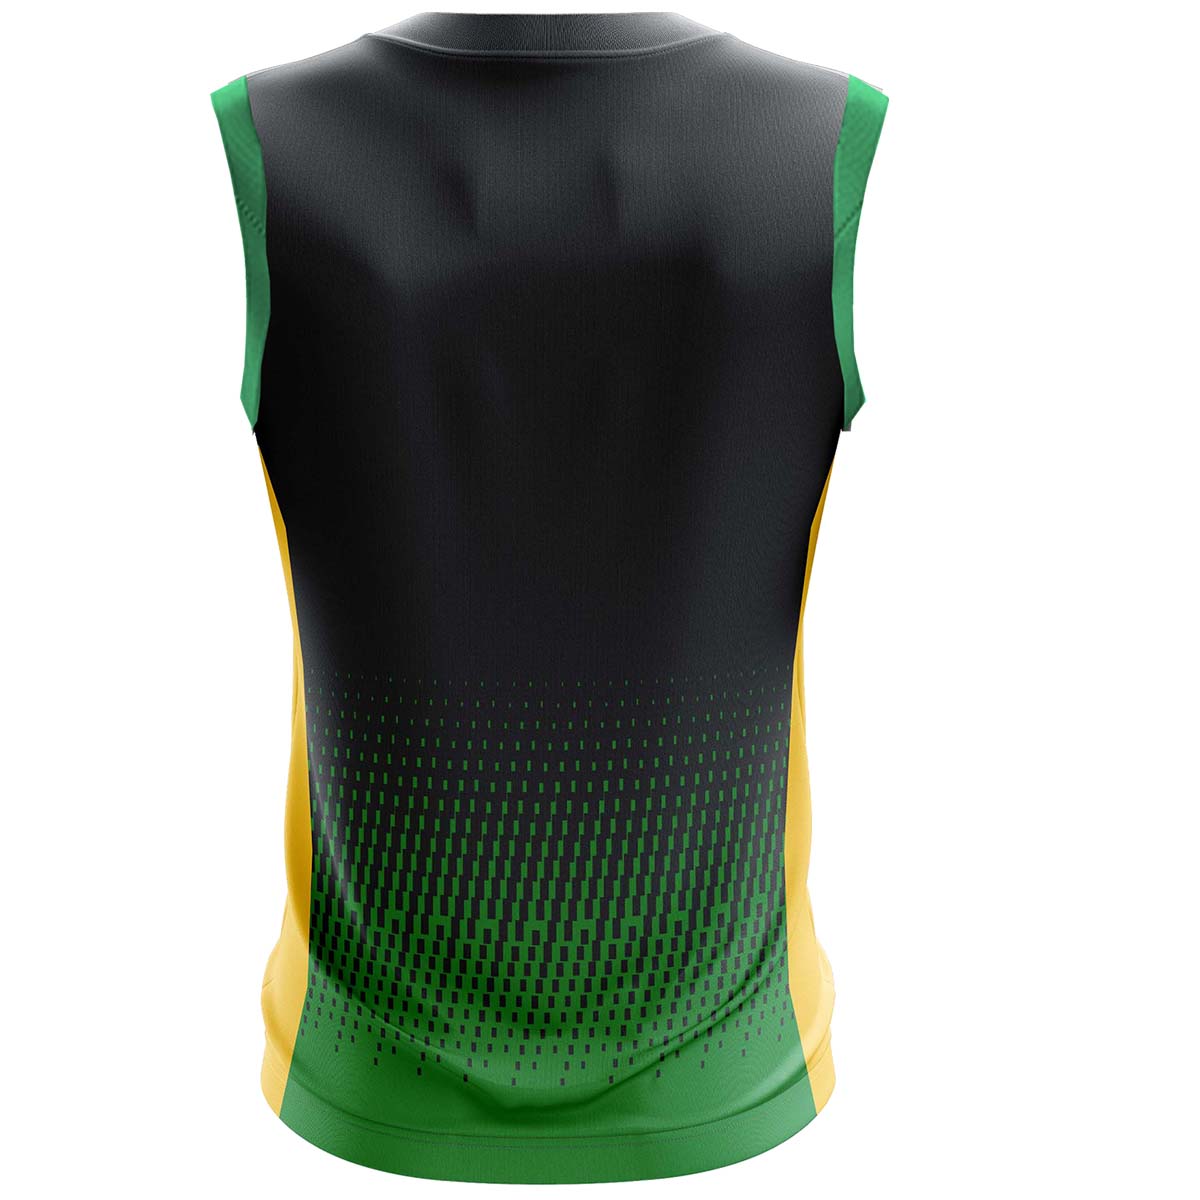 Mc Keever Carbery Rangers GAA Training Vest - Youth - Navy/Green/Yellow